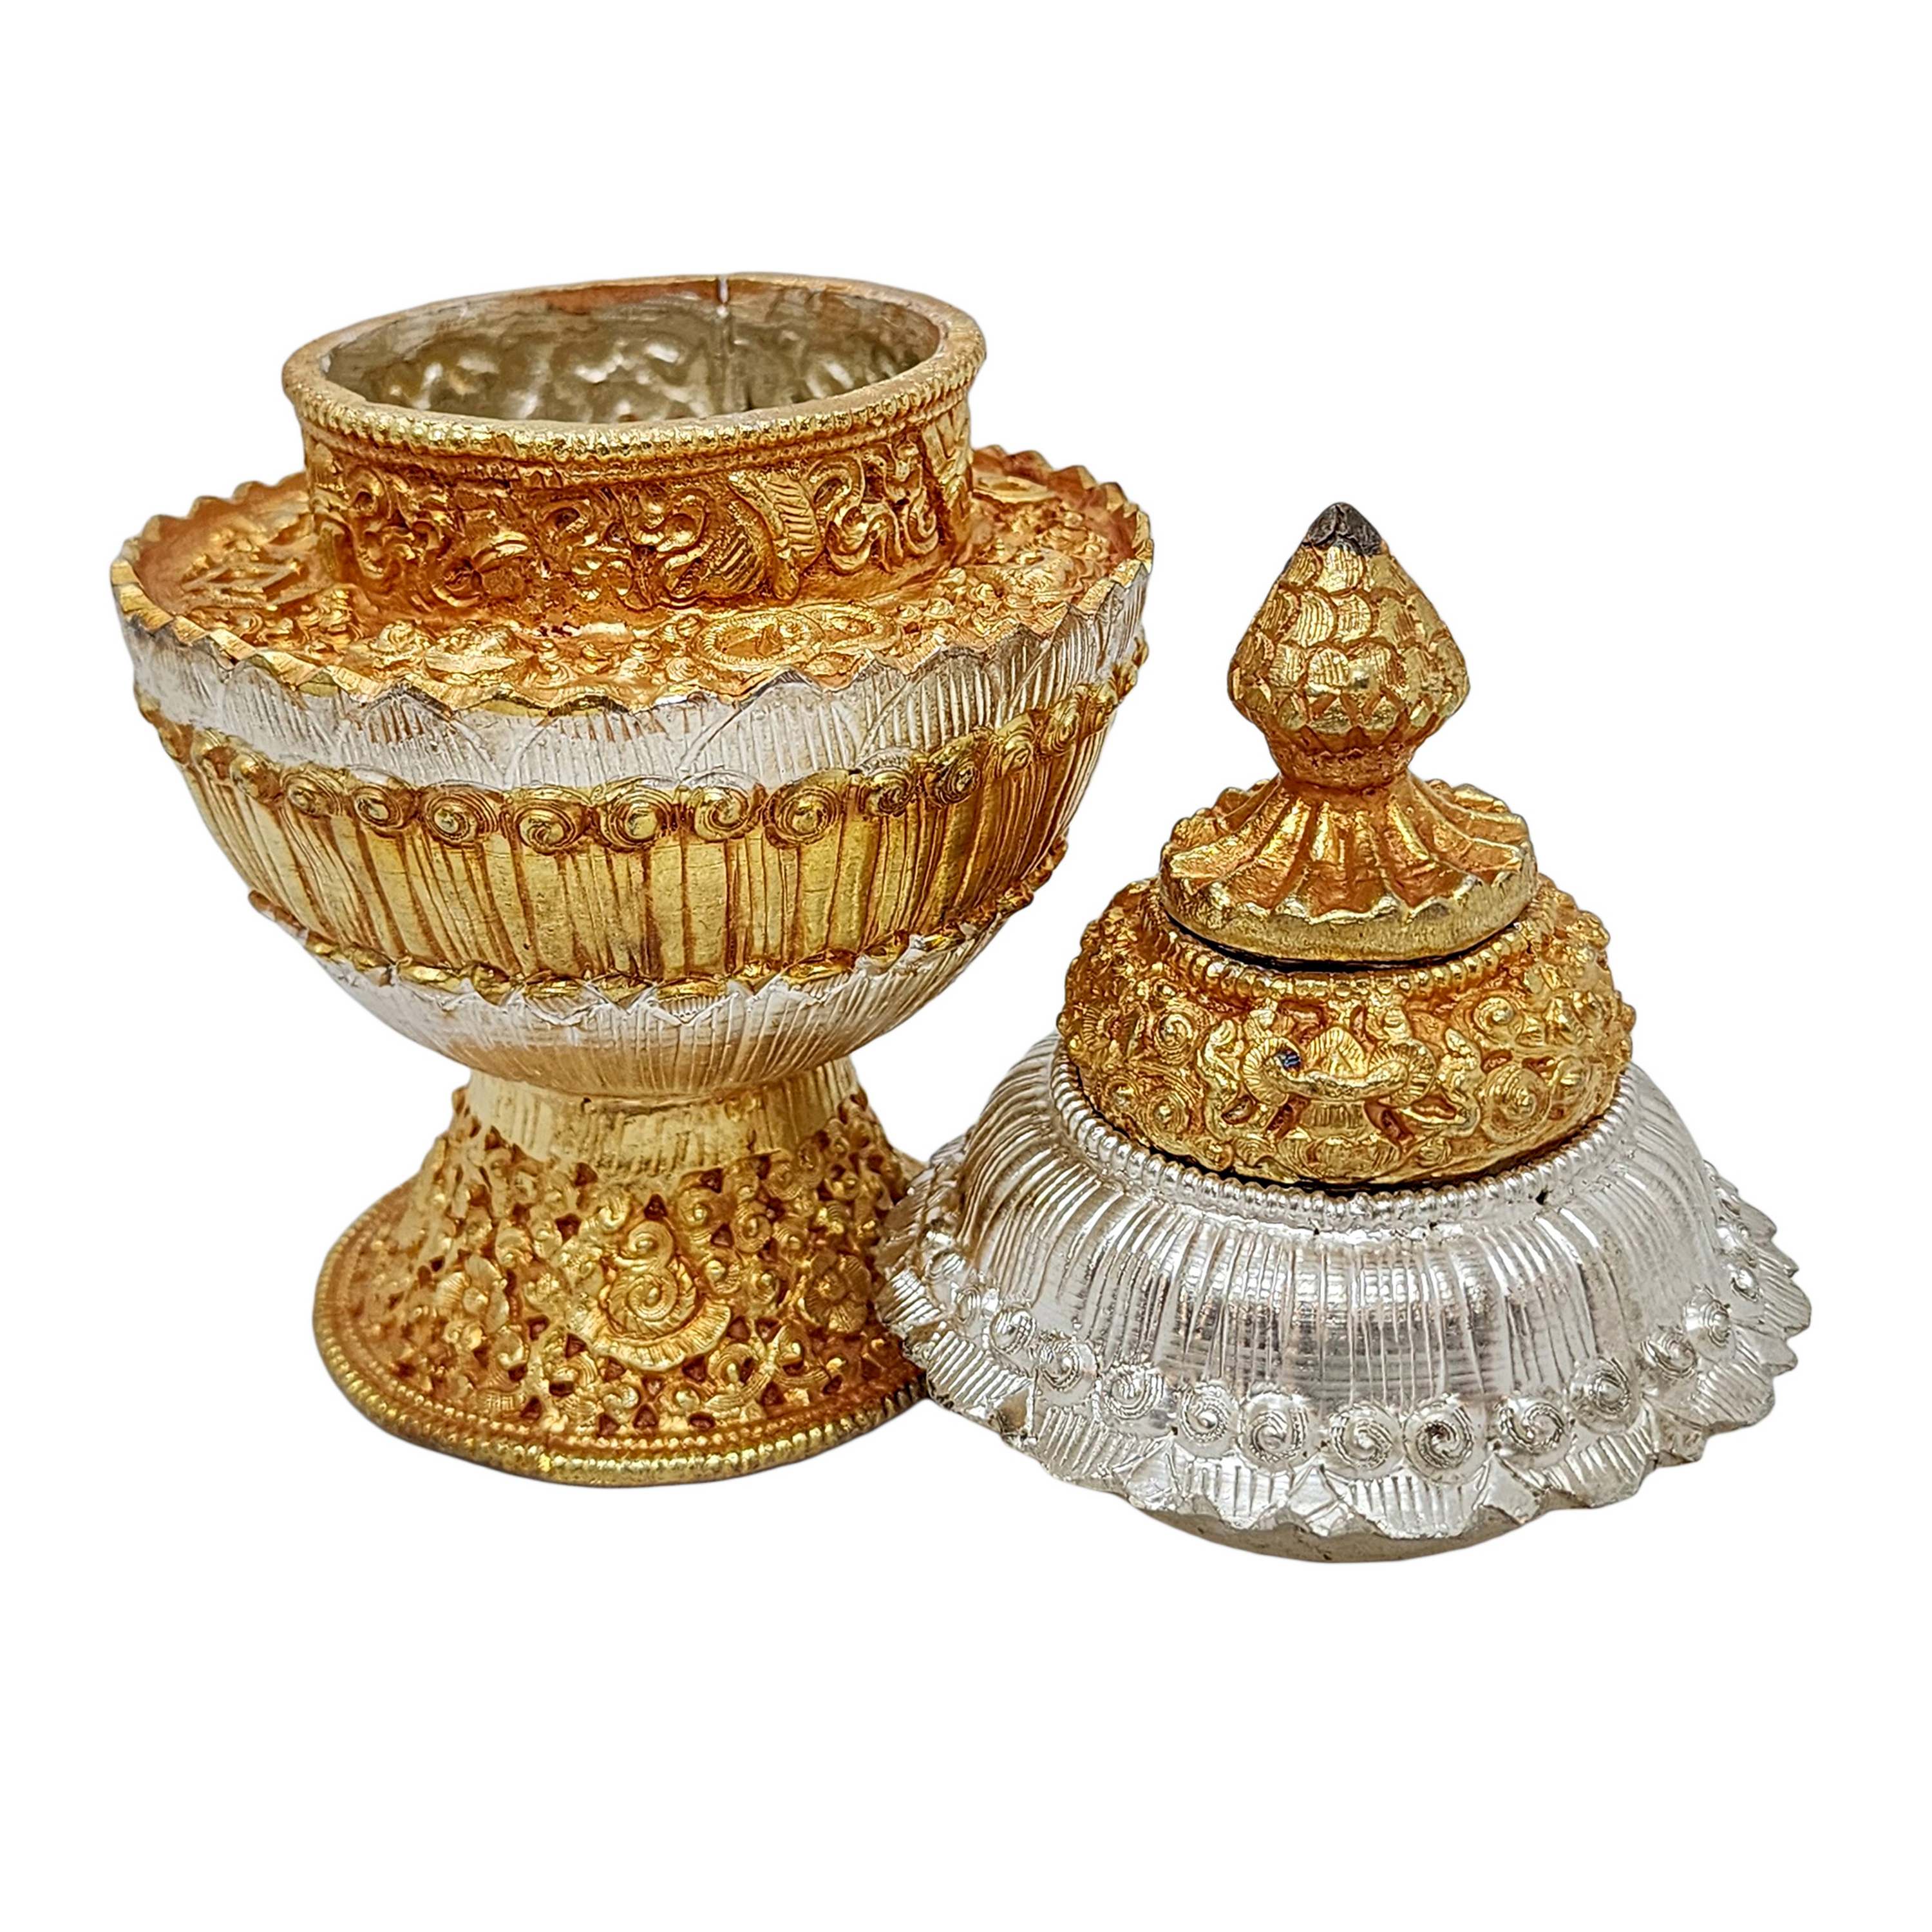 dophor, Nesi, Vessel For Offering Rice With Deep Carving, gold And Silver Plated, Rice Offering